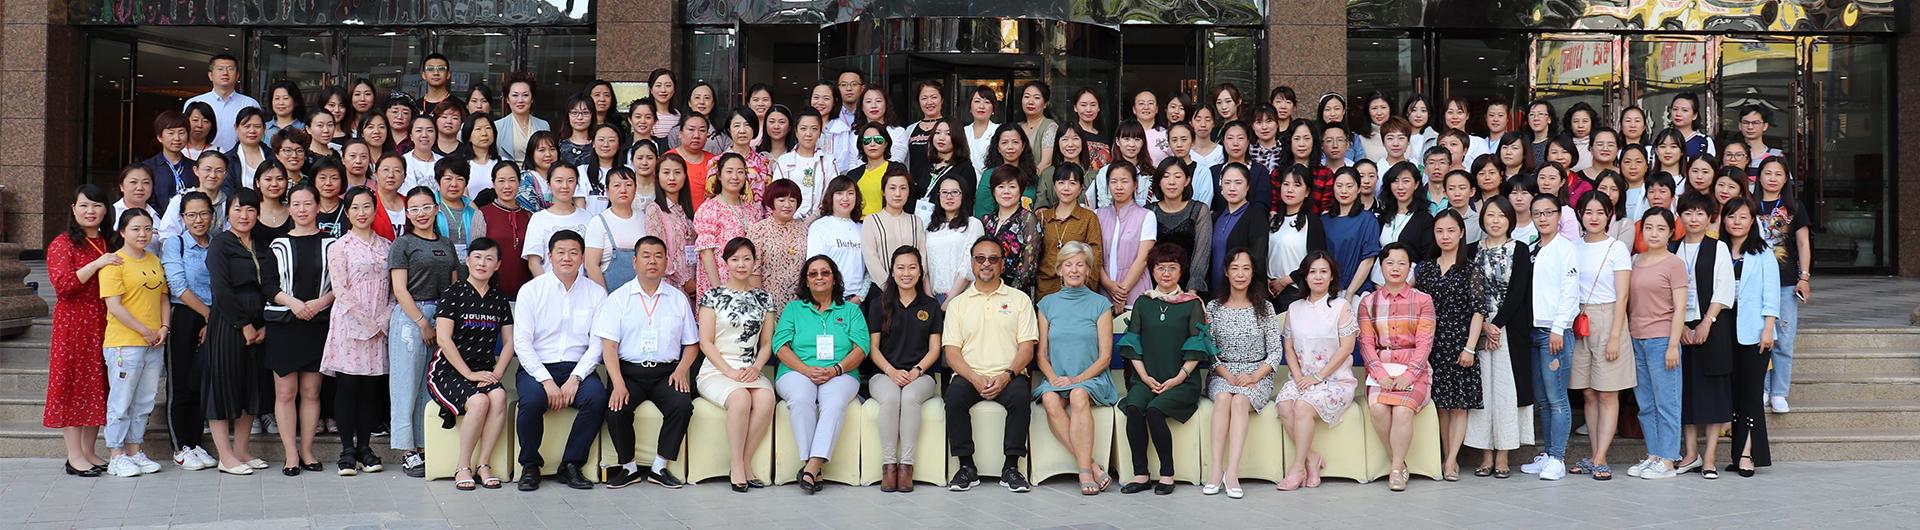 Participants of 9th Annual HSOS and International Early Childhood Science Education Conference